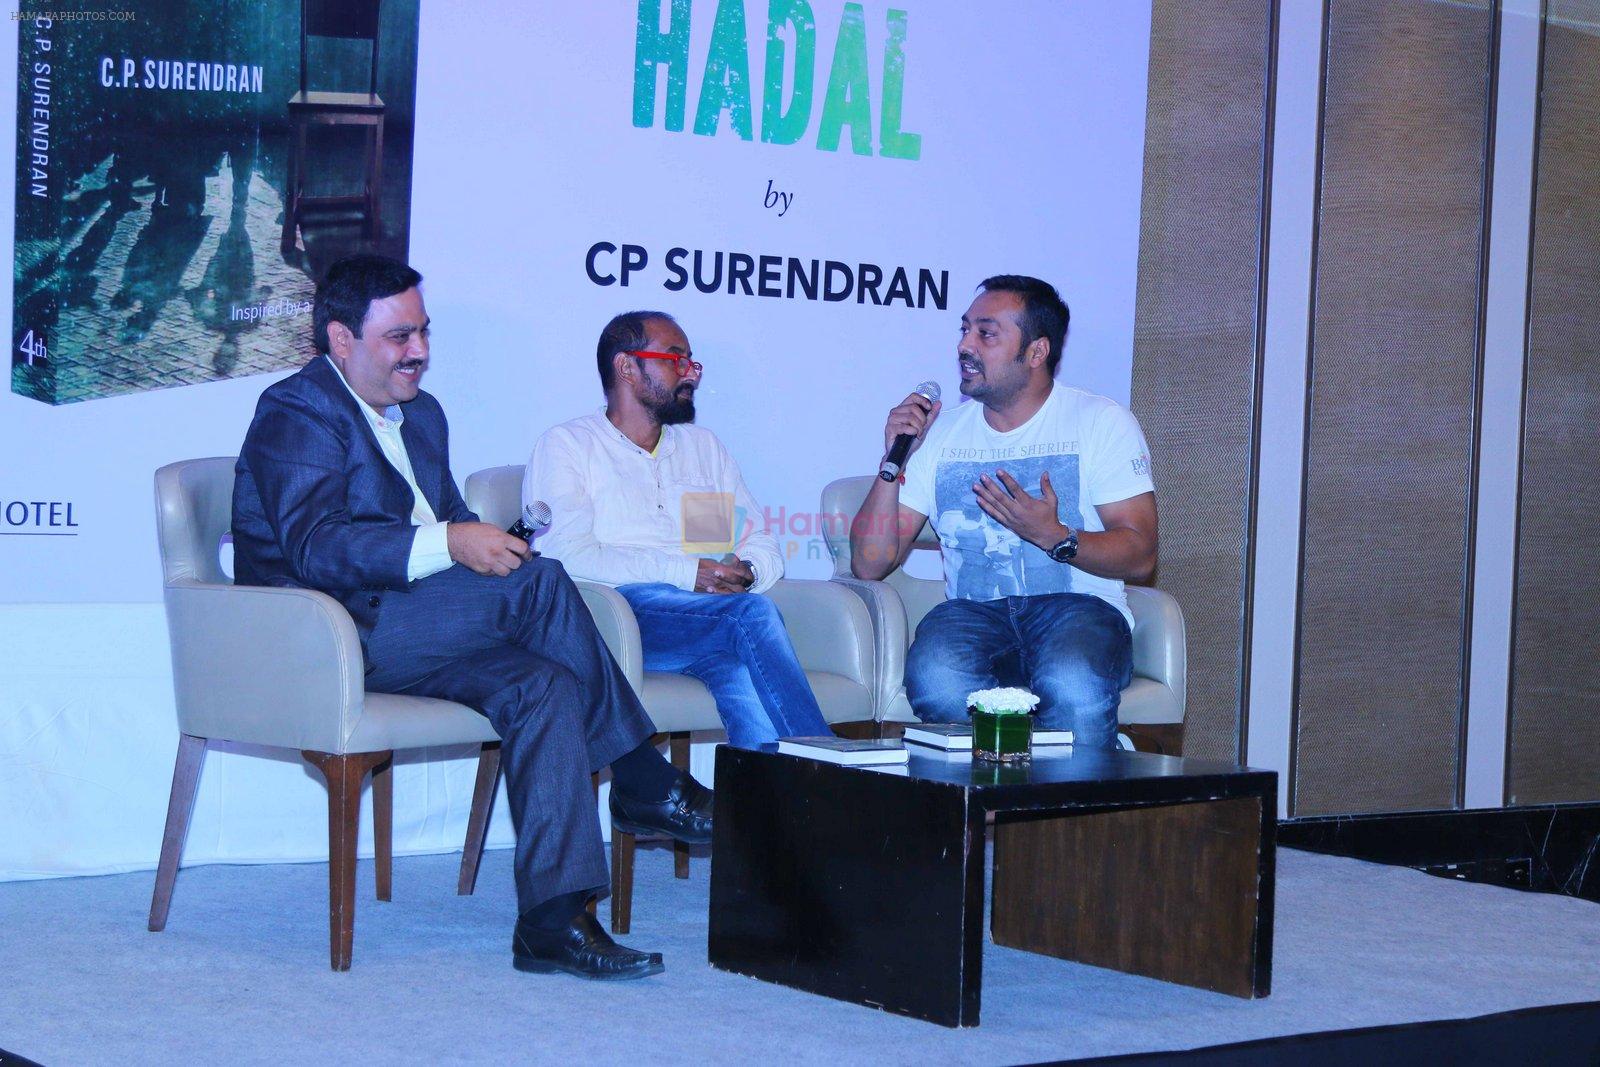 Anurag Kashyap unveils CP Surendran's Book Hadal in Mumbai on 10th April 2015